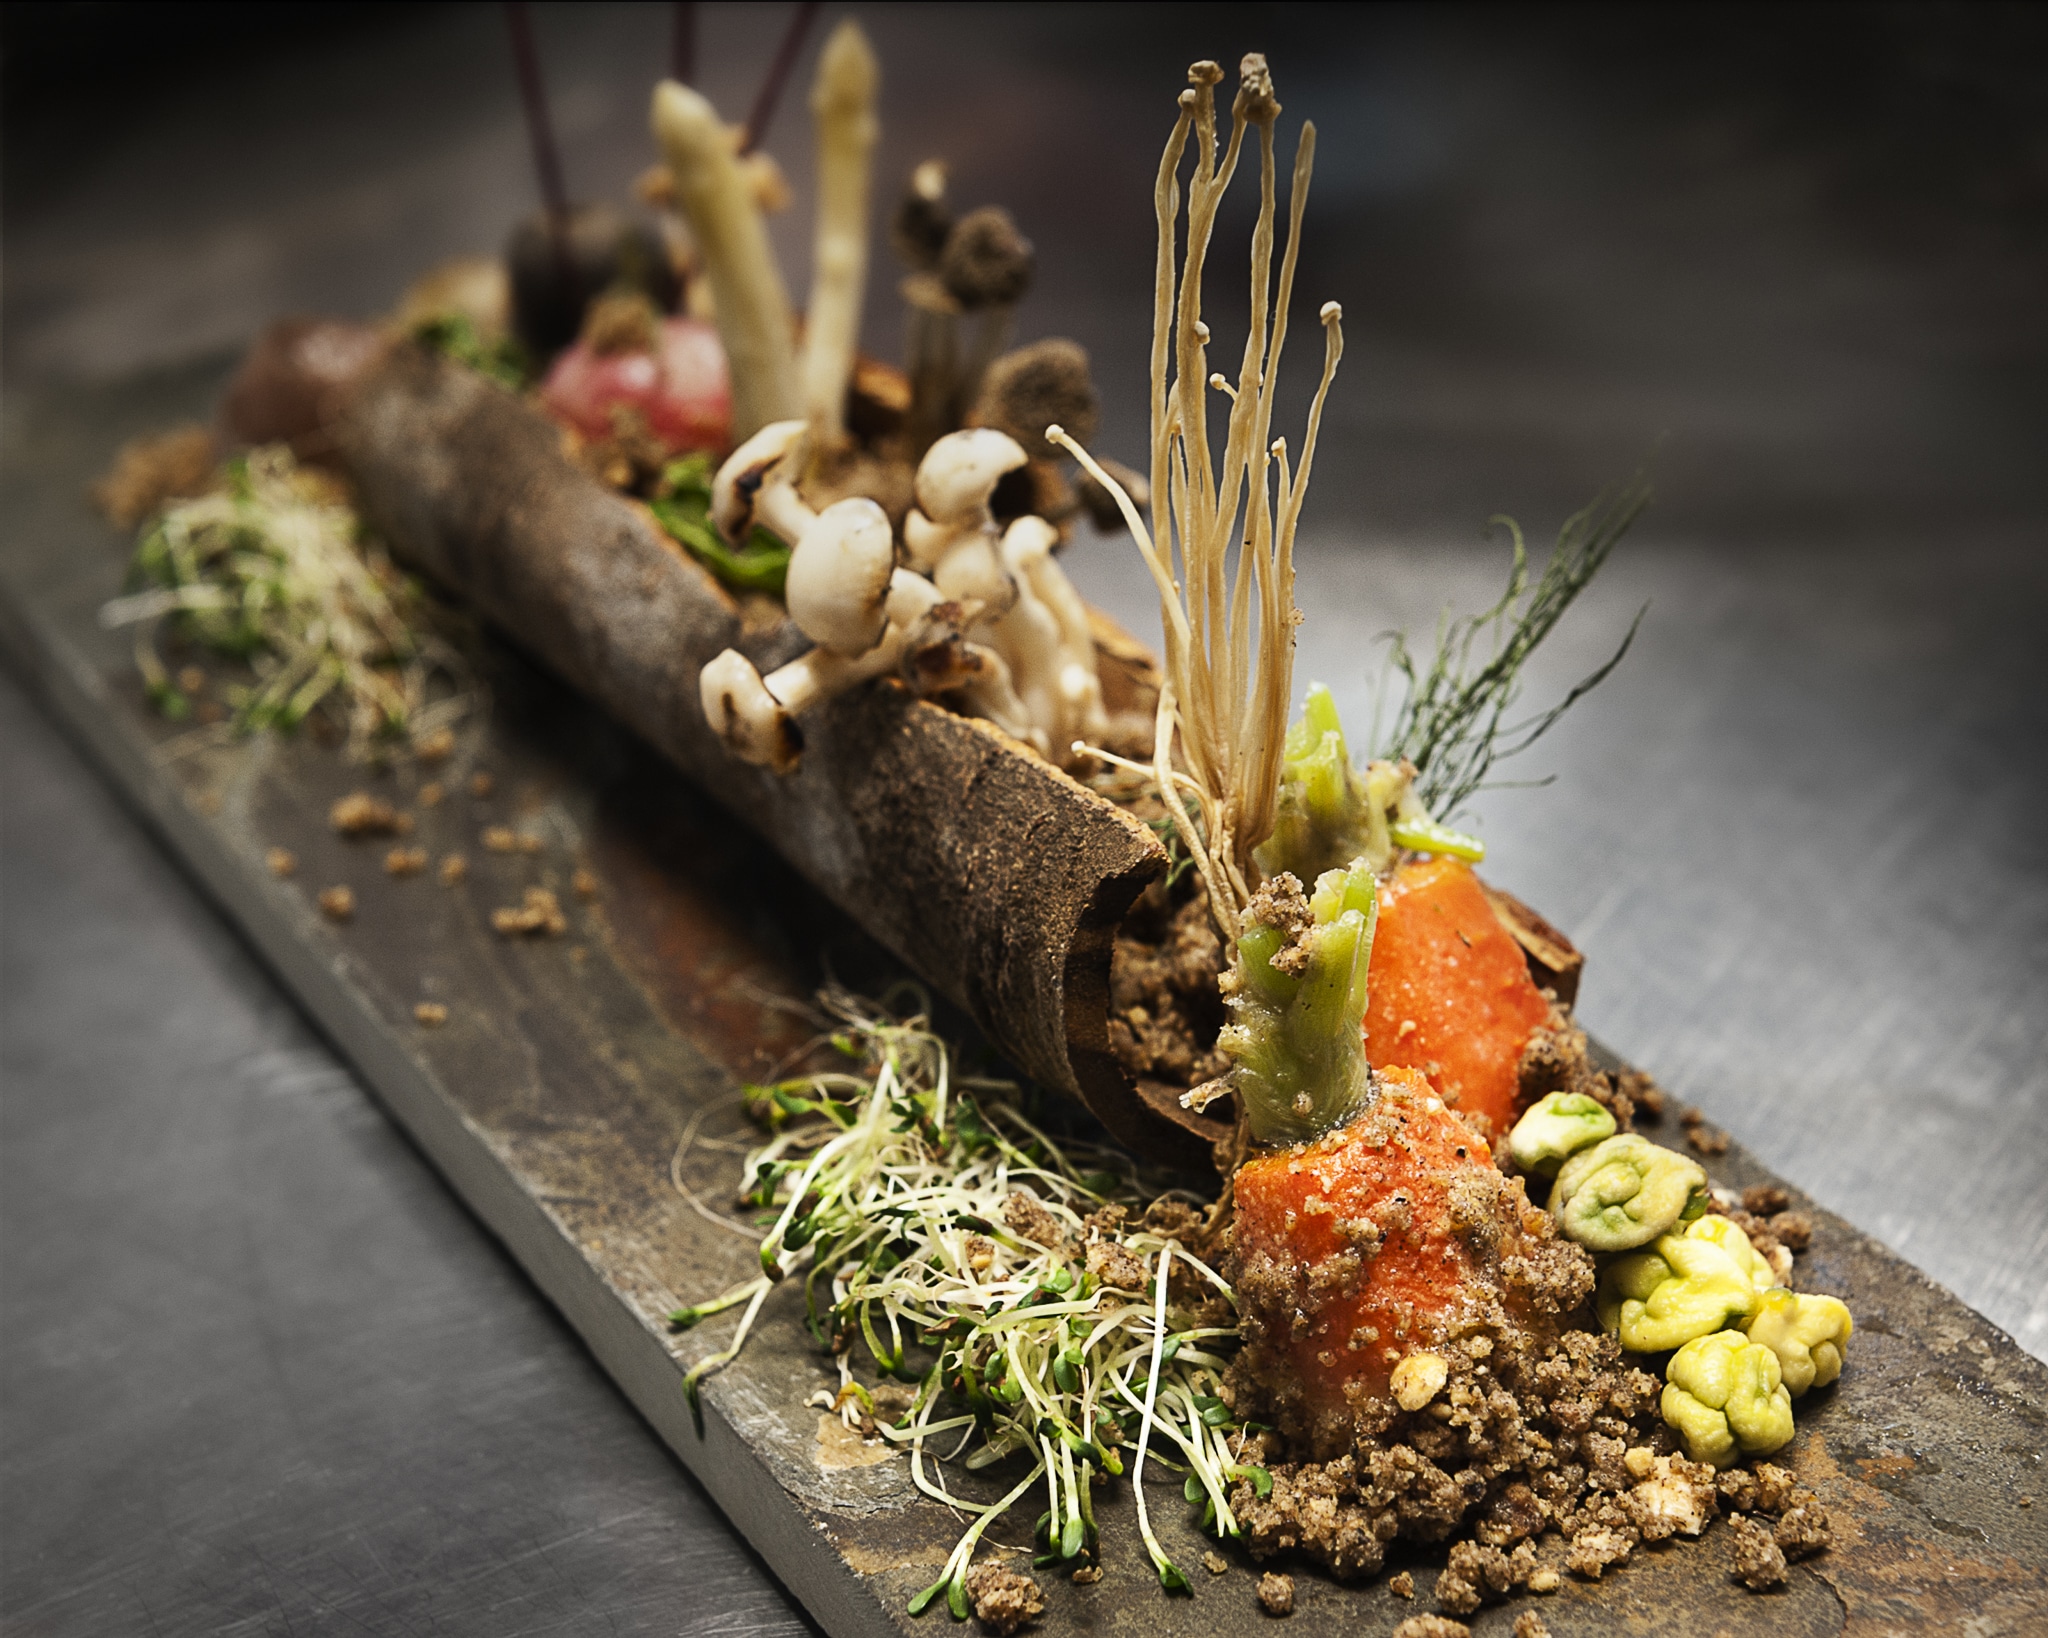 A plate inspired by the restaurant Noma in a student assignment. This shows a log with various vegetables, herbs, and leafy greens along with edible dirt.